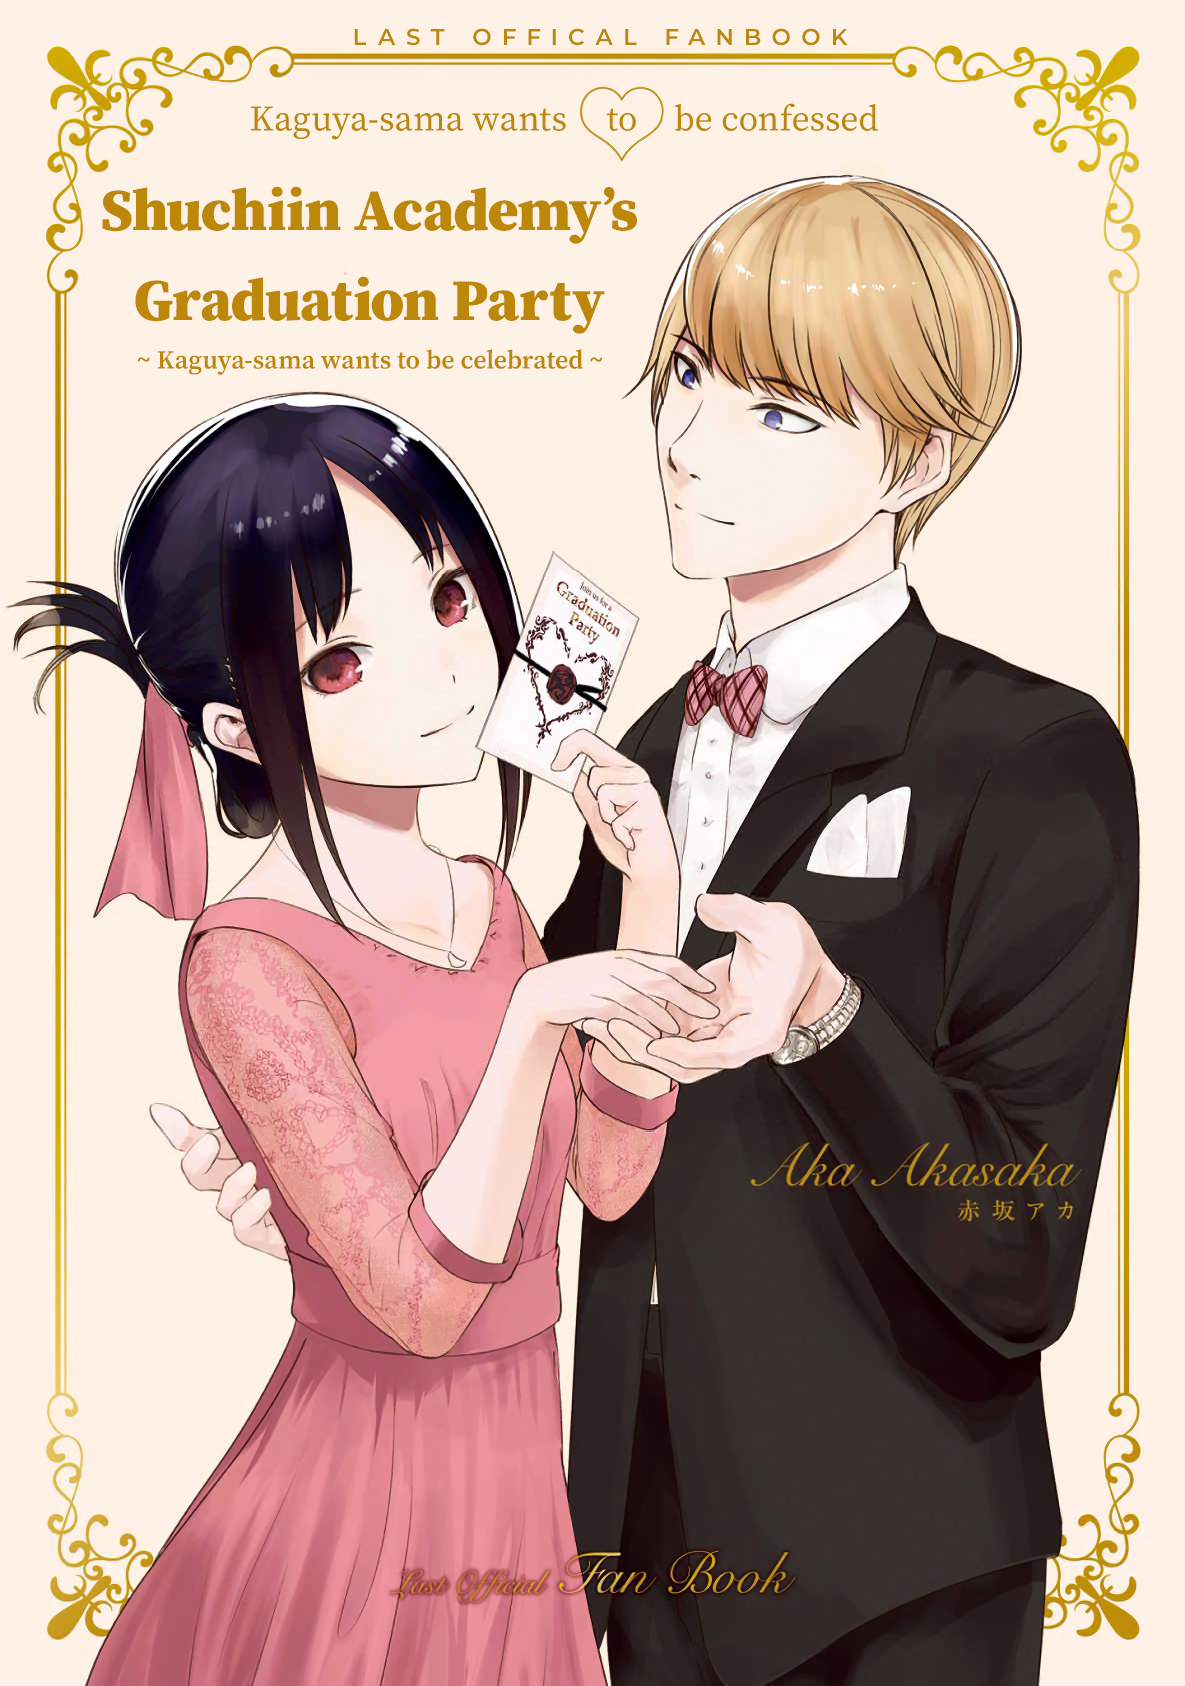 Shuchiin Academy’S Graduation Party ~Kaguya-Sama Wants To Be Celebrated~: Last Official Fanbook Chapter 0: Preface - Picture 1